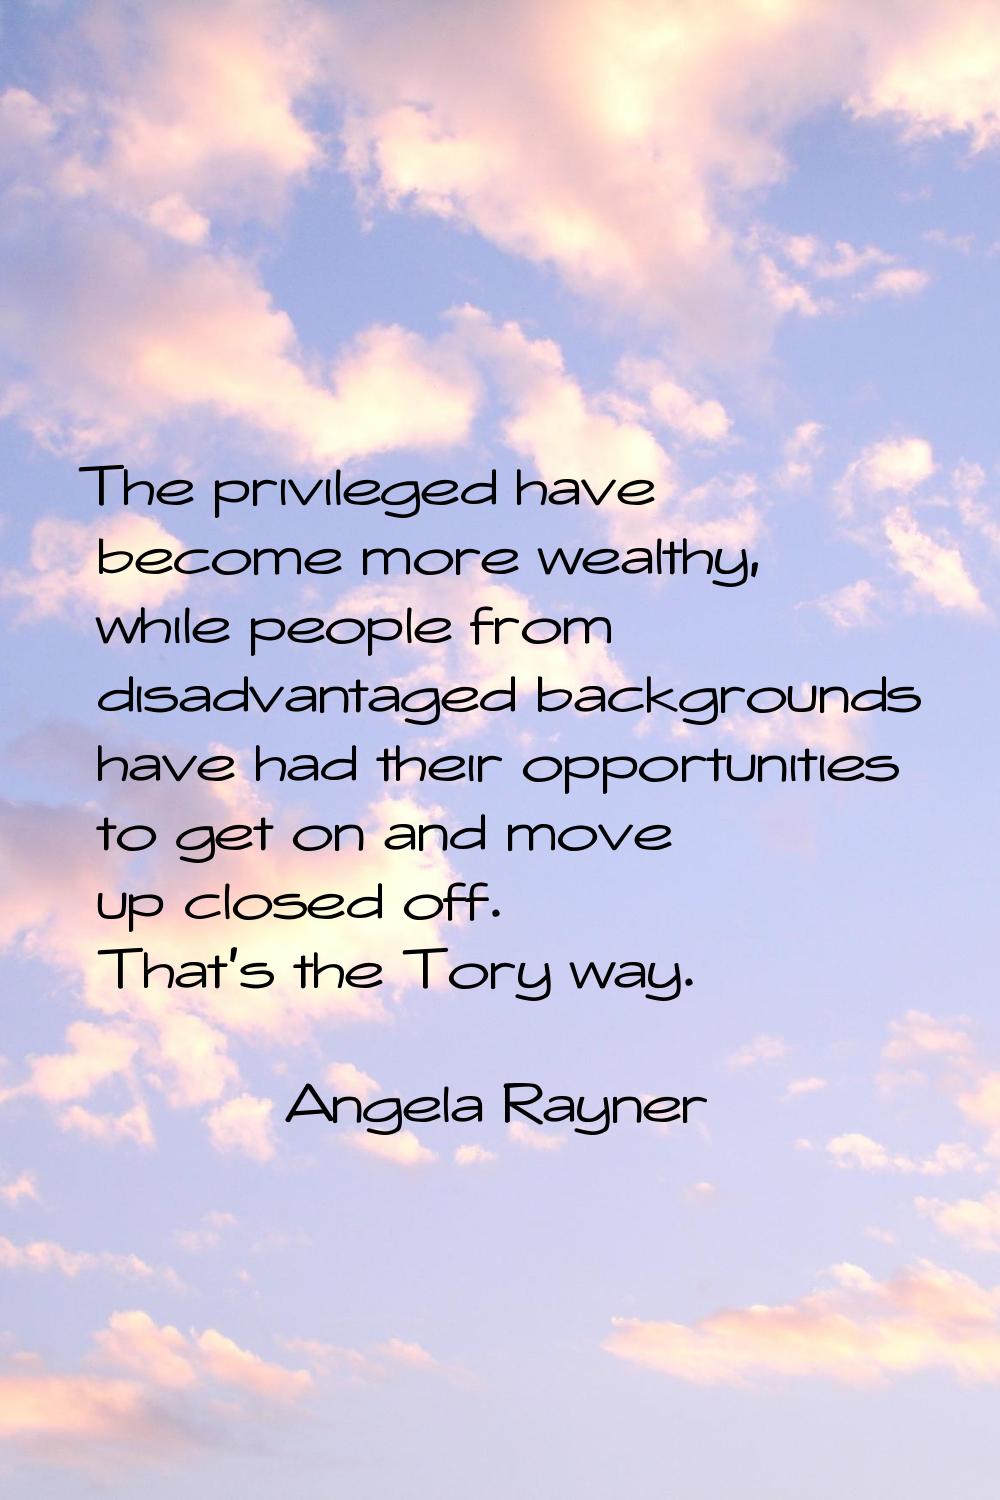 The privileged have become more wealthy, while people from disadvantaged backgrounds have had their